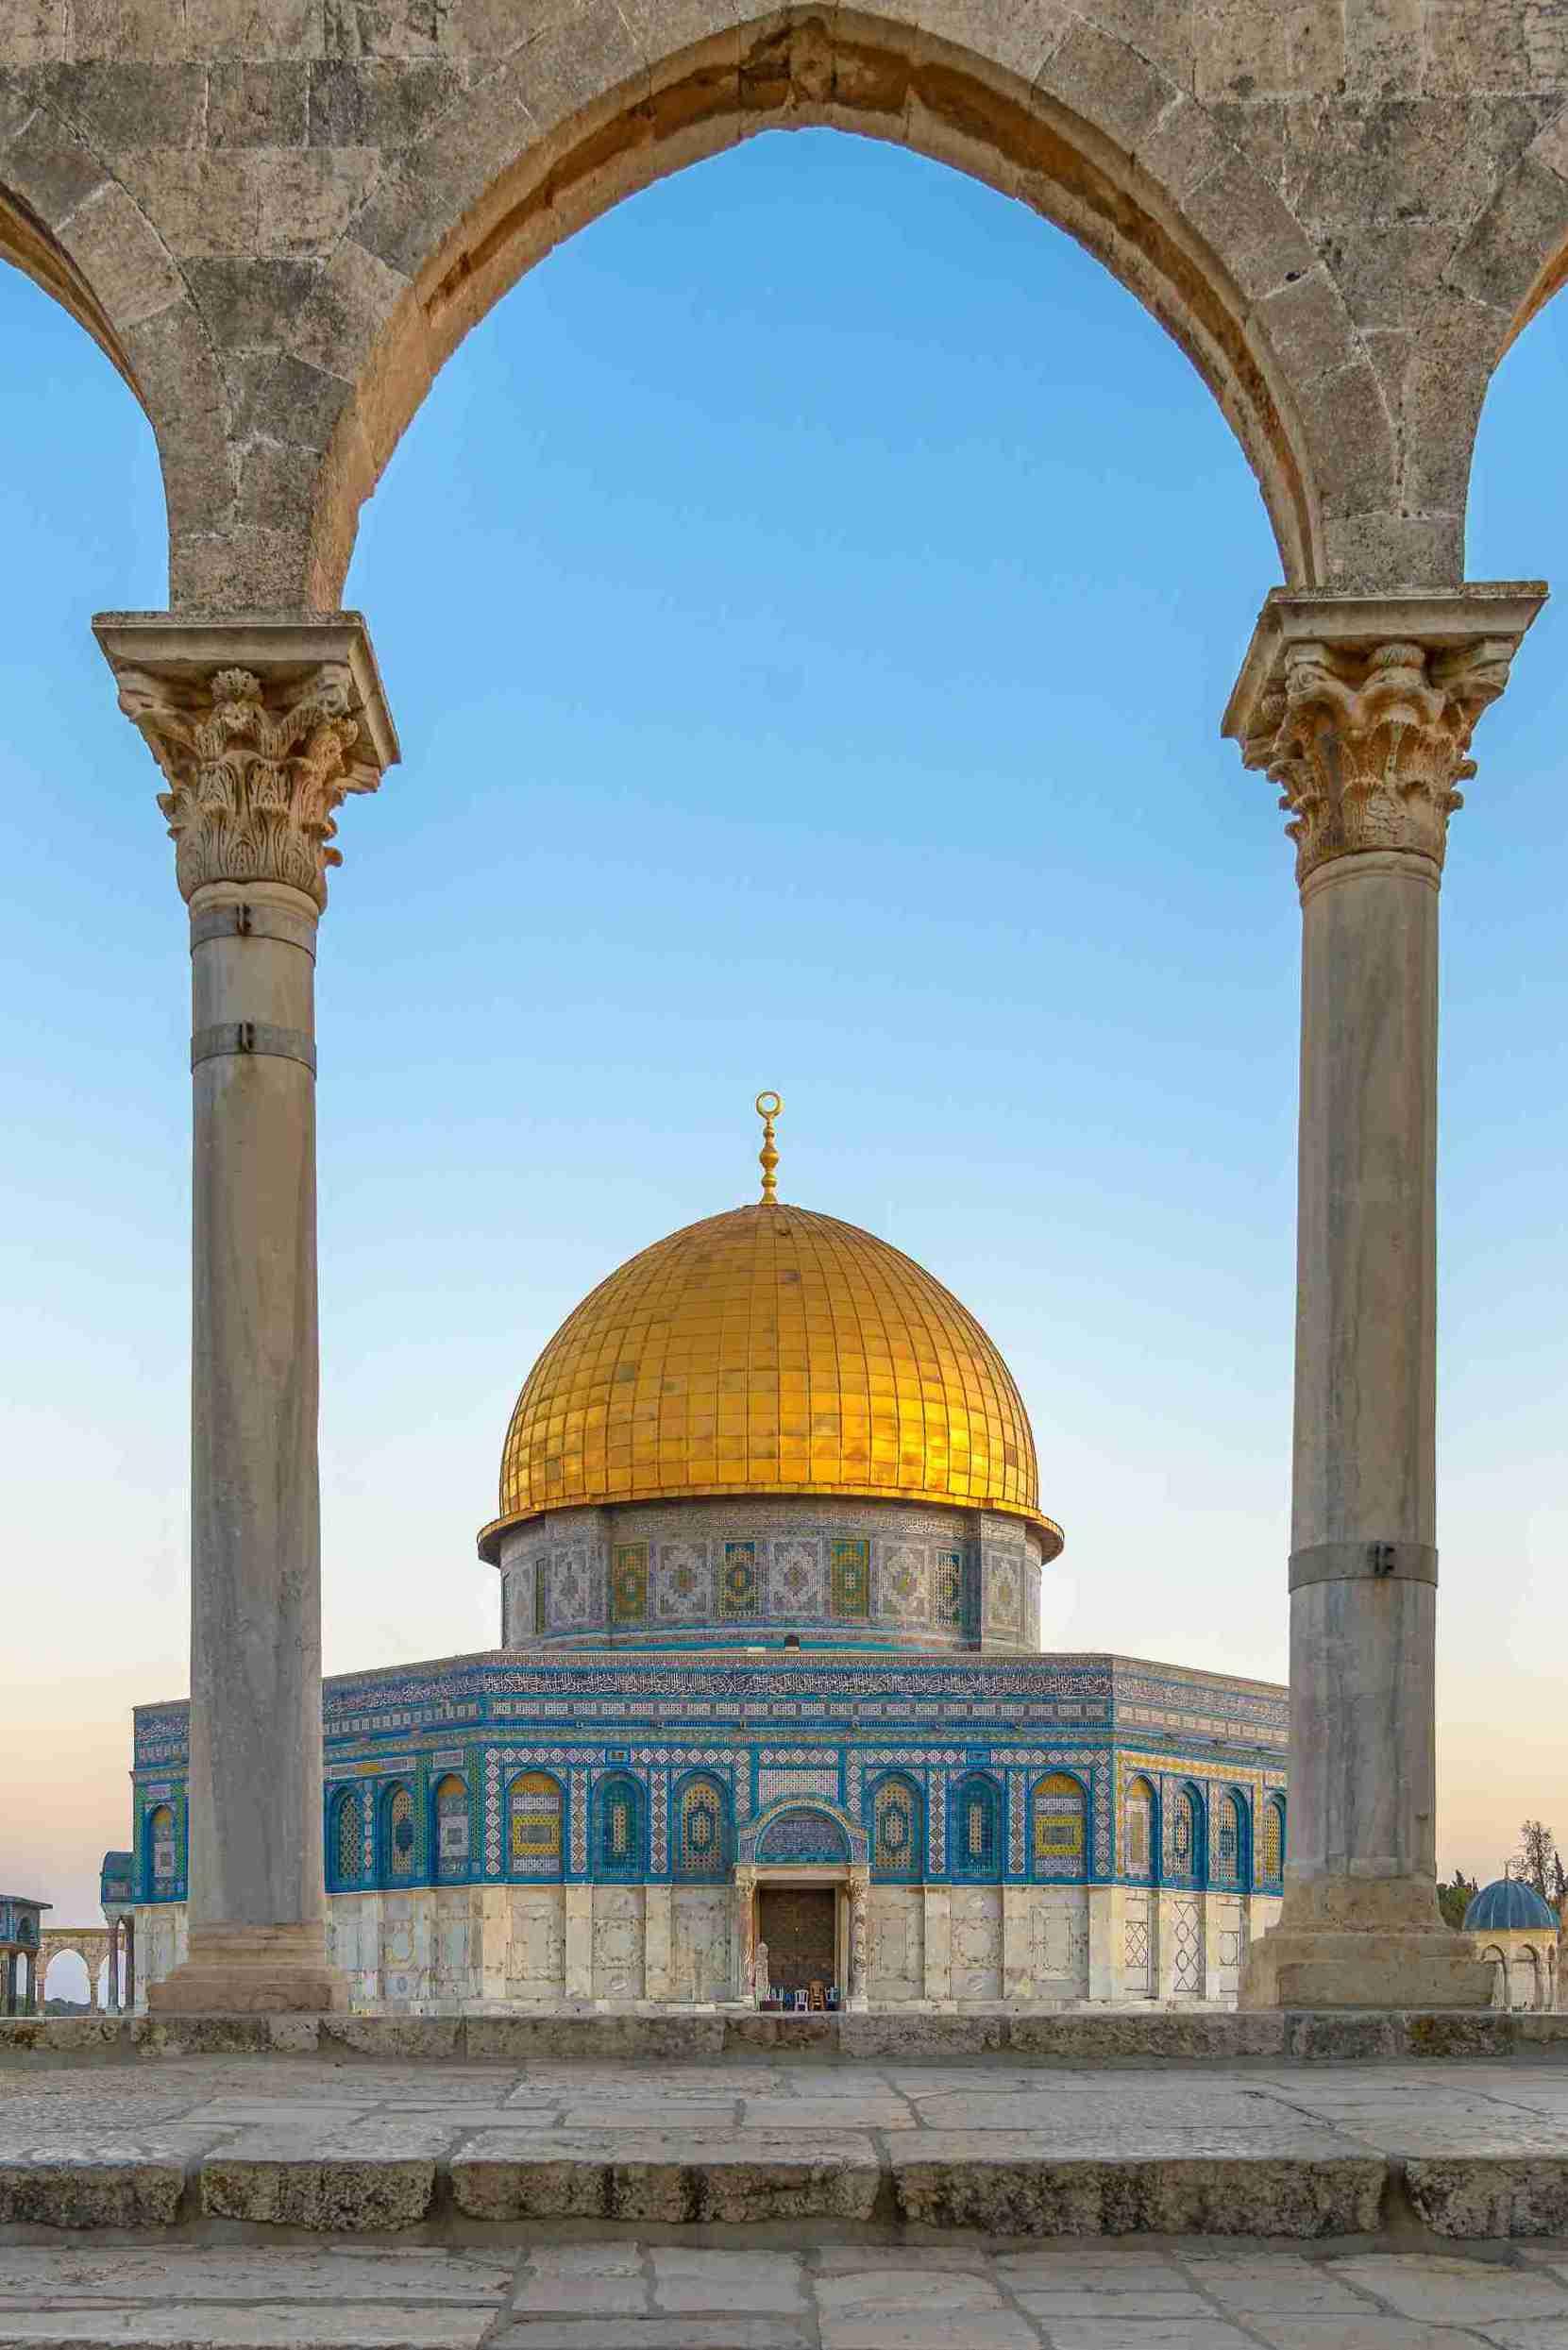 Tradition Tours is proud to include on your Israel tour